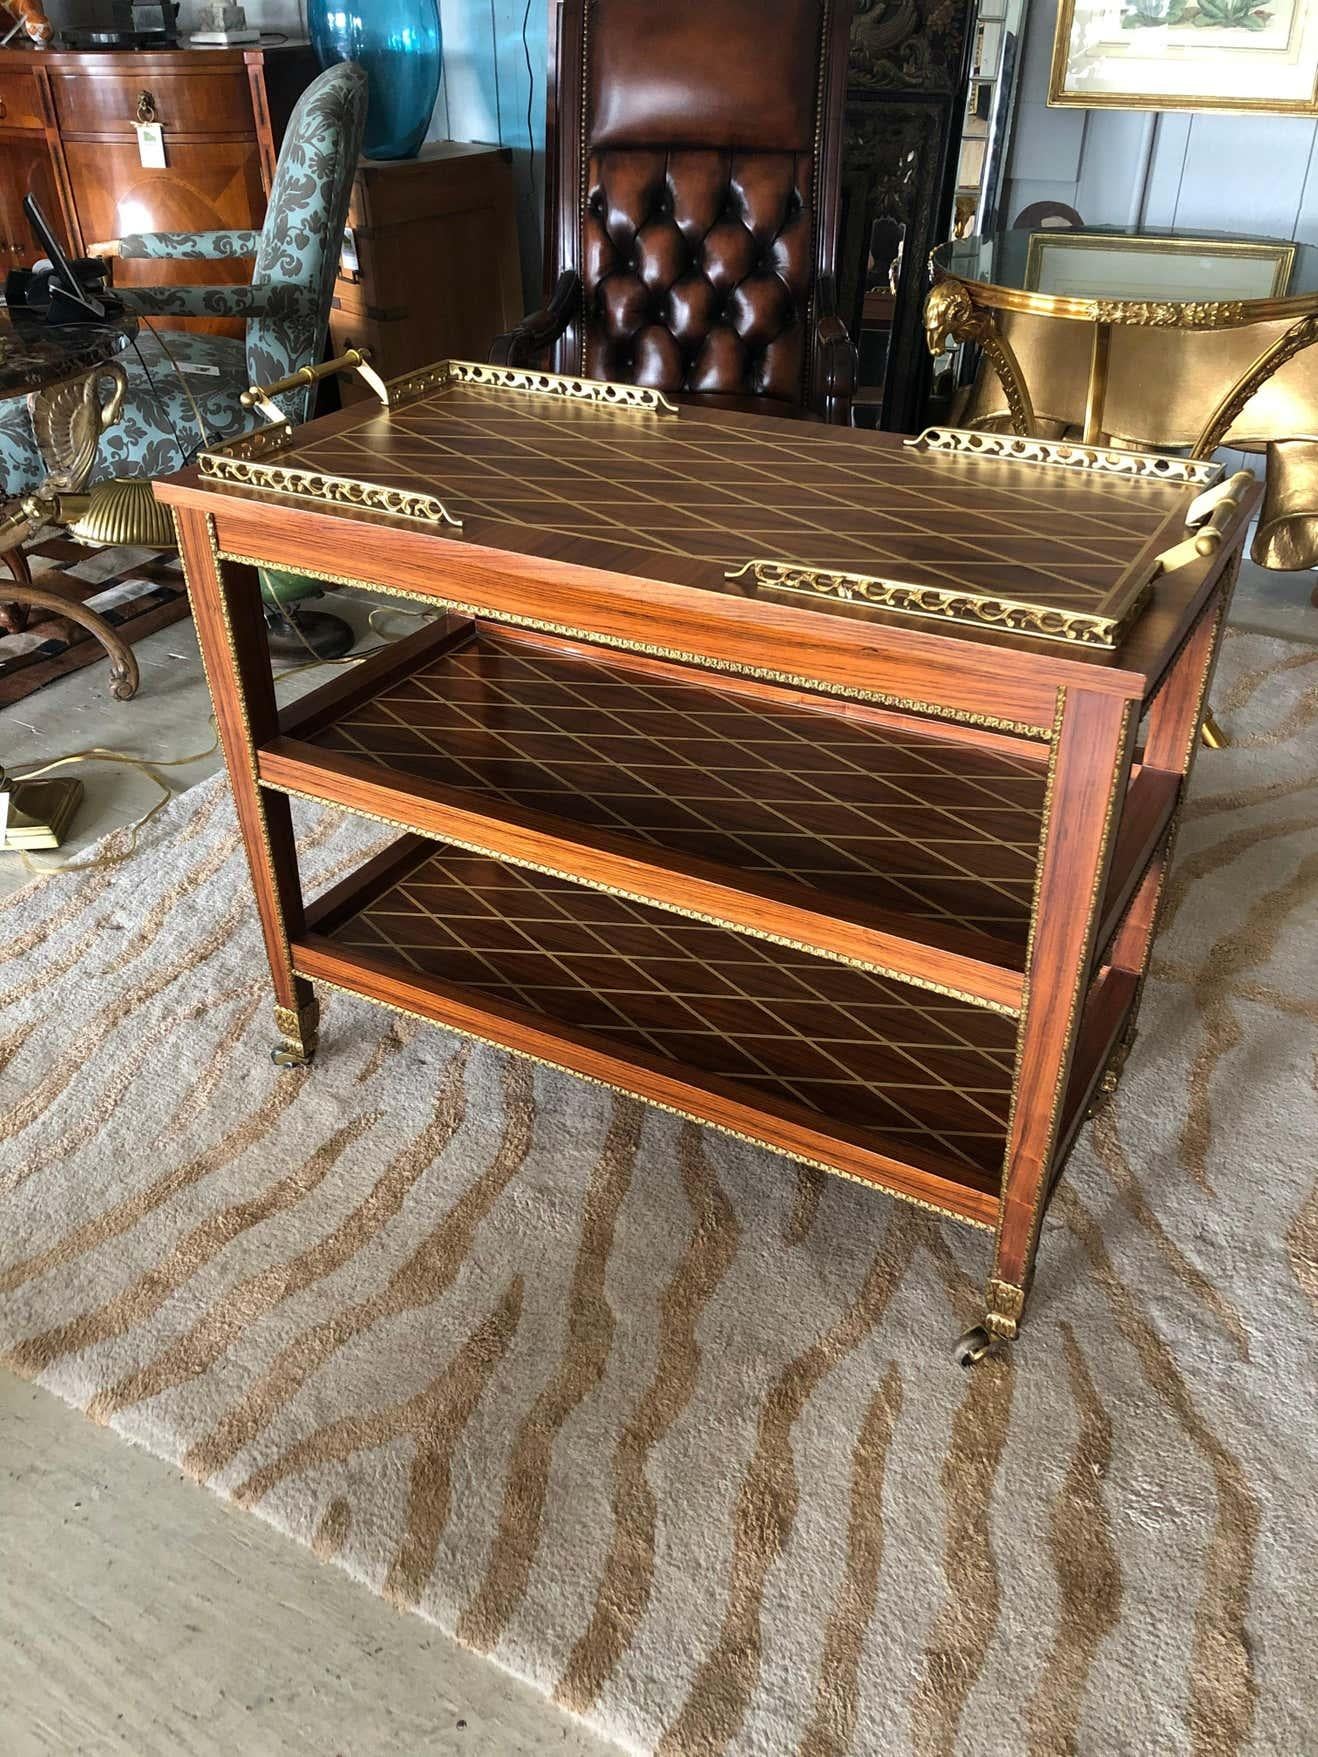 An unusually elegant mixed wood inlay bar cart having gorgeous criss cross design on each of the 3 tiers as well as rich matte brass galleries and handles. Even the caps on the tapered legs are sumptuously decorative. Rolls smoothly on casters, but